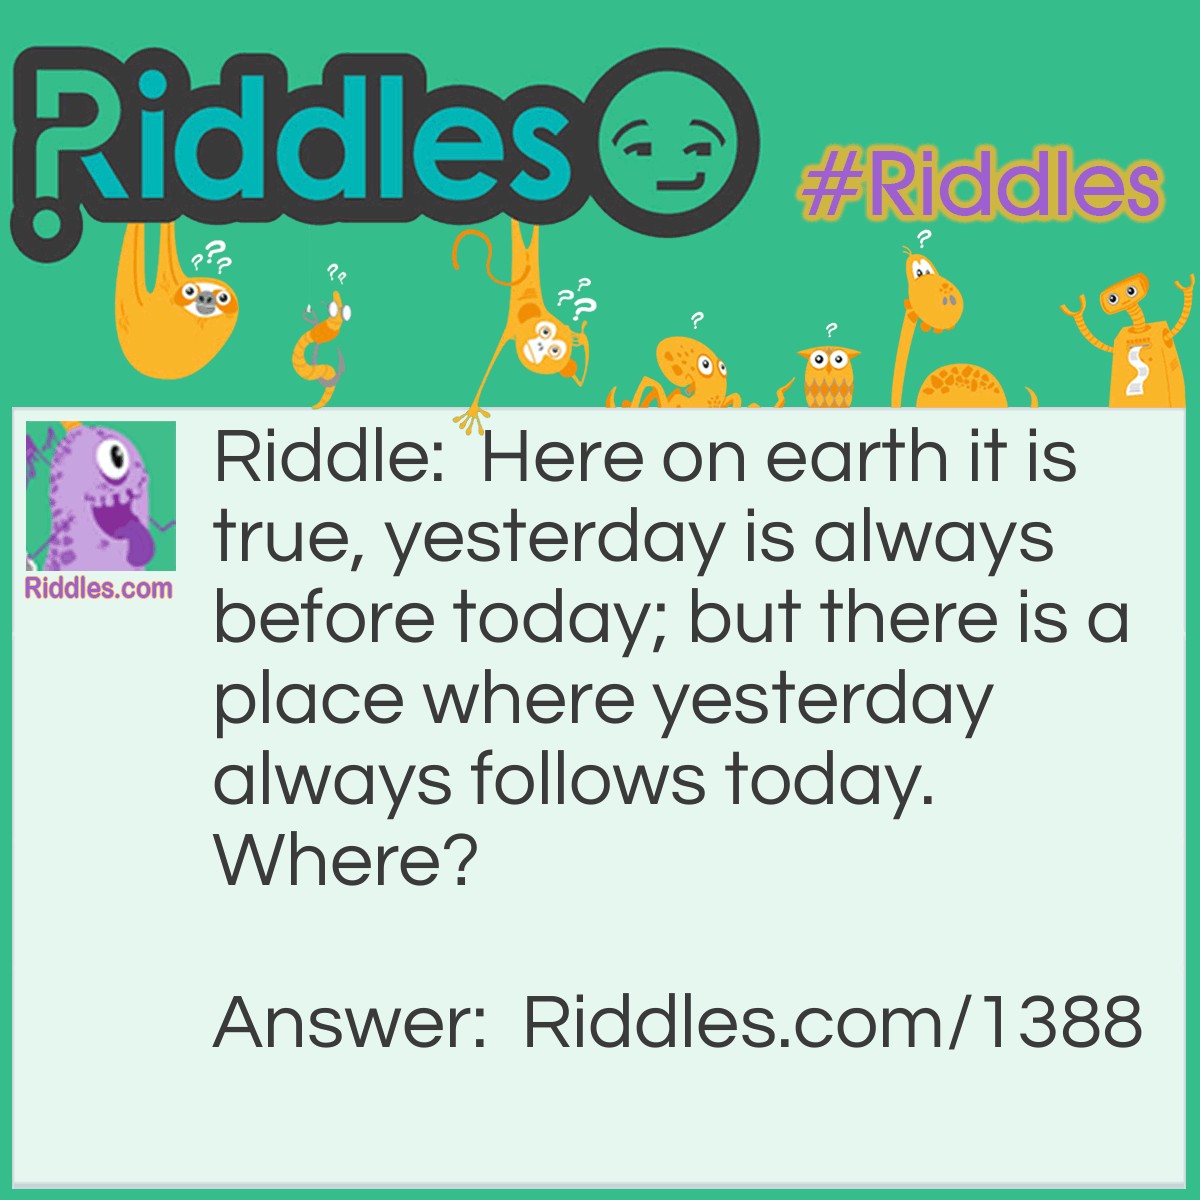 Riddle: Here on earth it is true, yesterday is always before today; but there is a place where yesterday always follows today.
Where? Answer: The Dictionary.